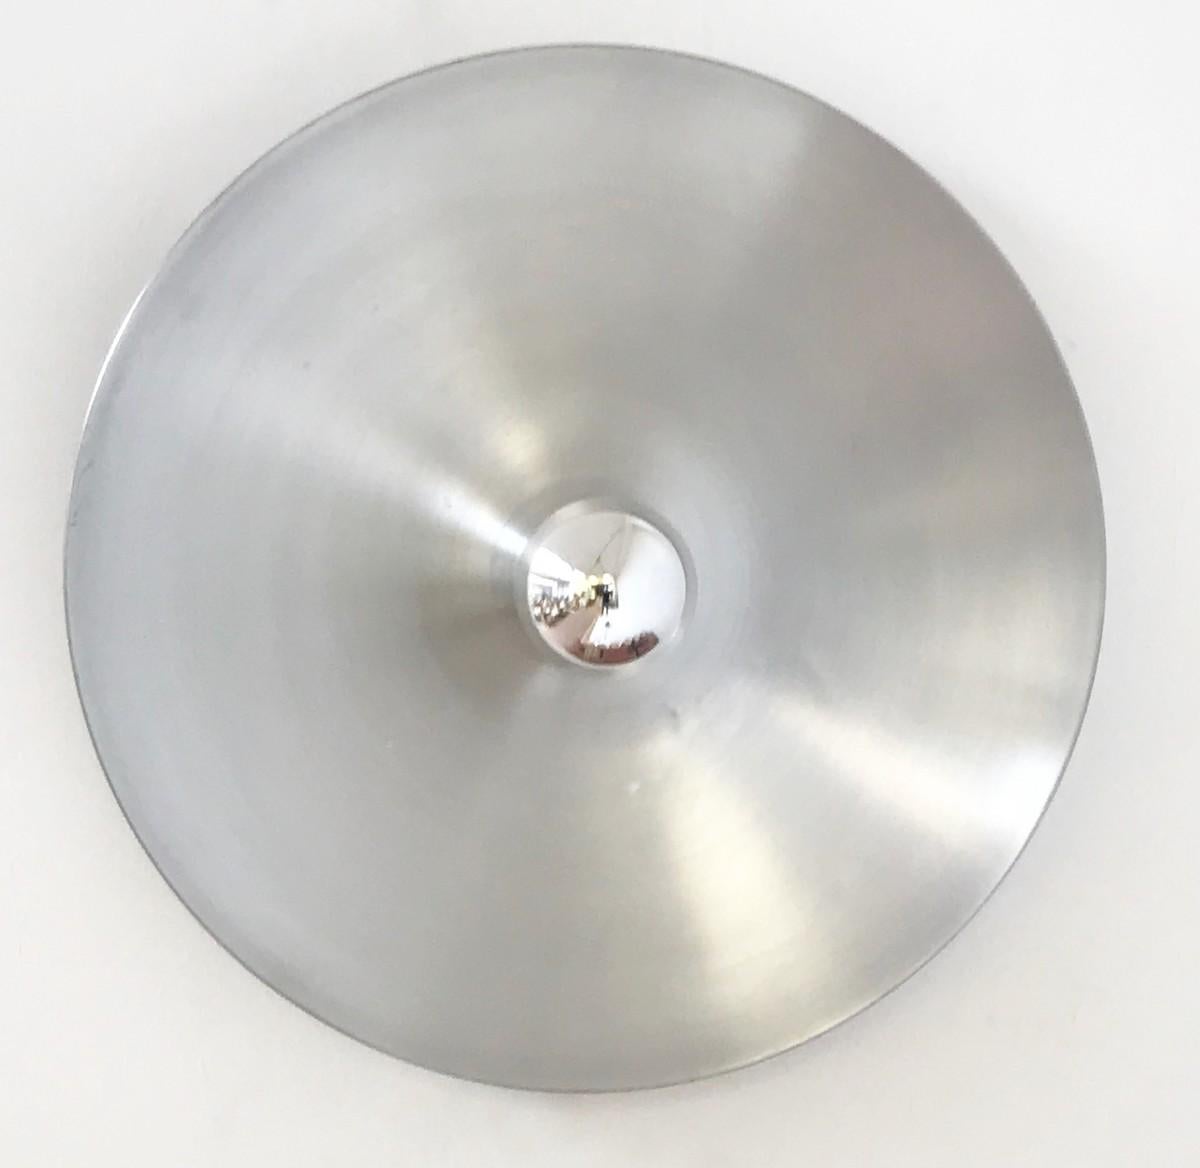 Aluminium wall sconce as Used by Charlotte Perriand for Les Arcs - 1970s.